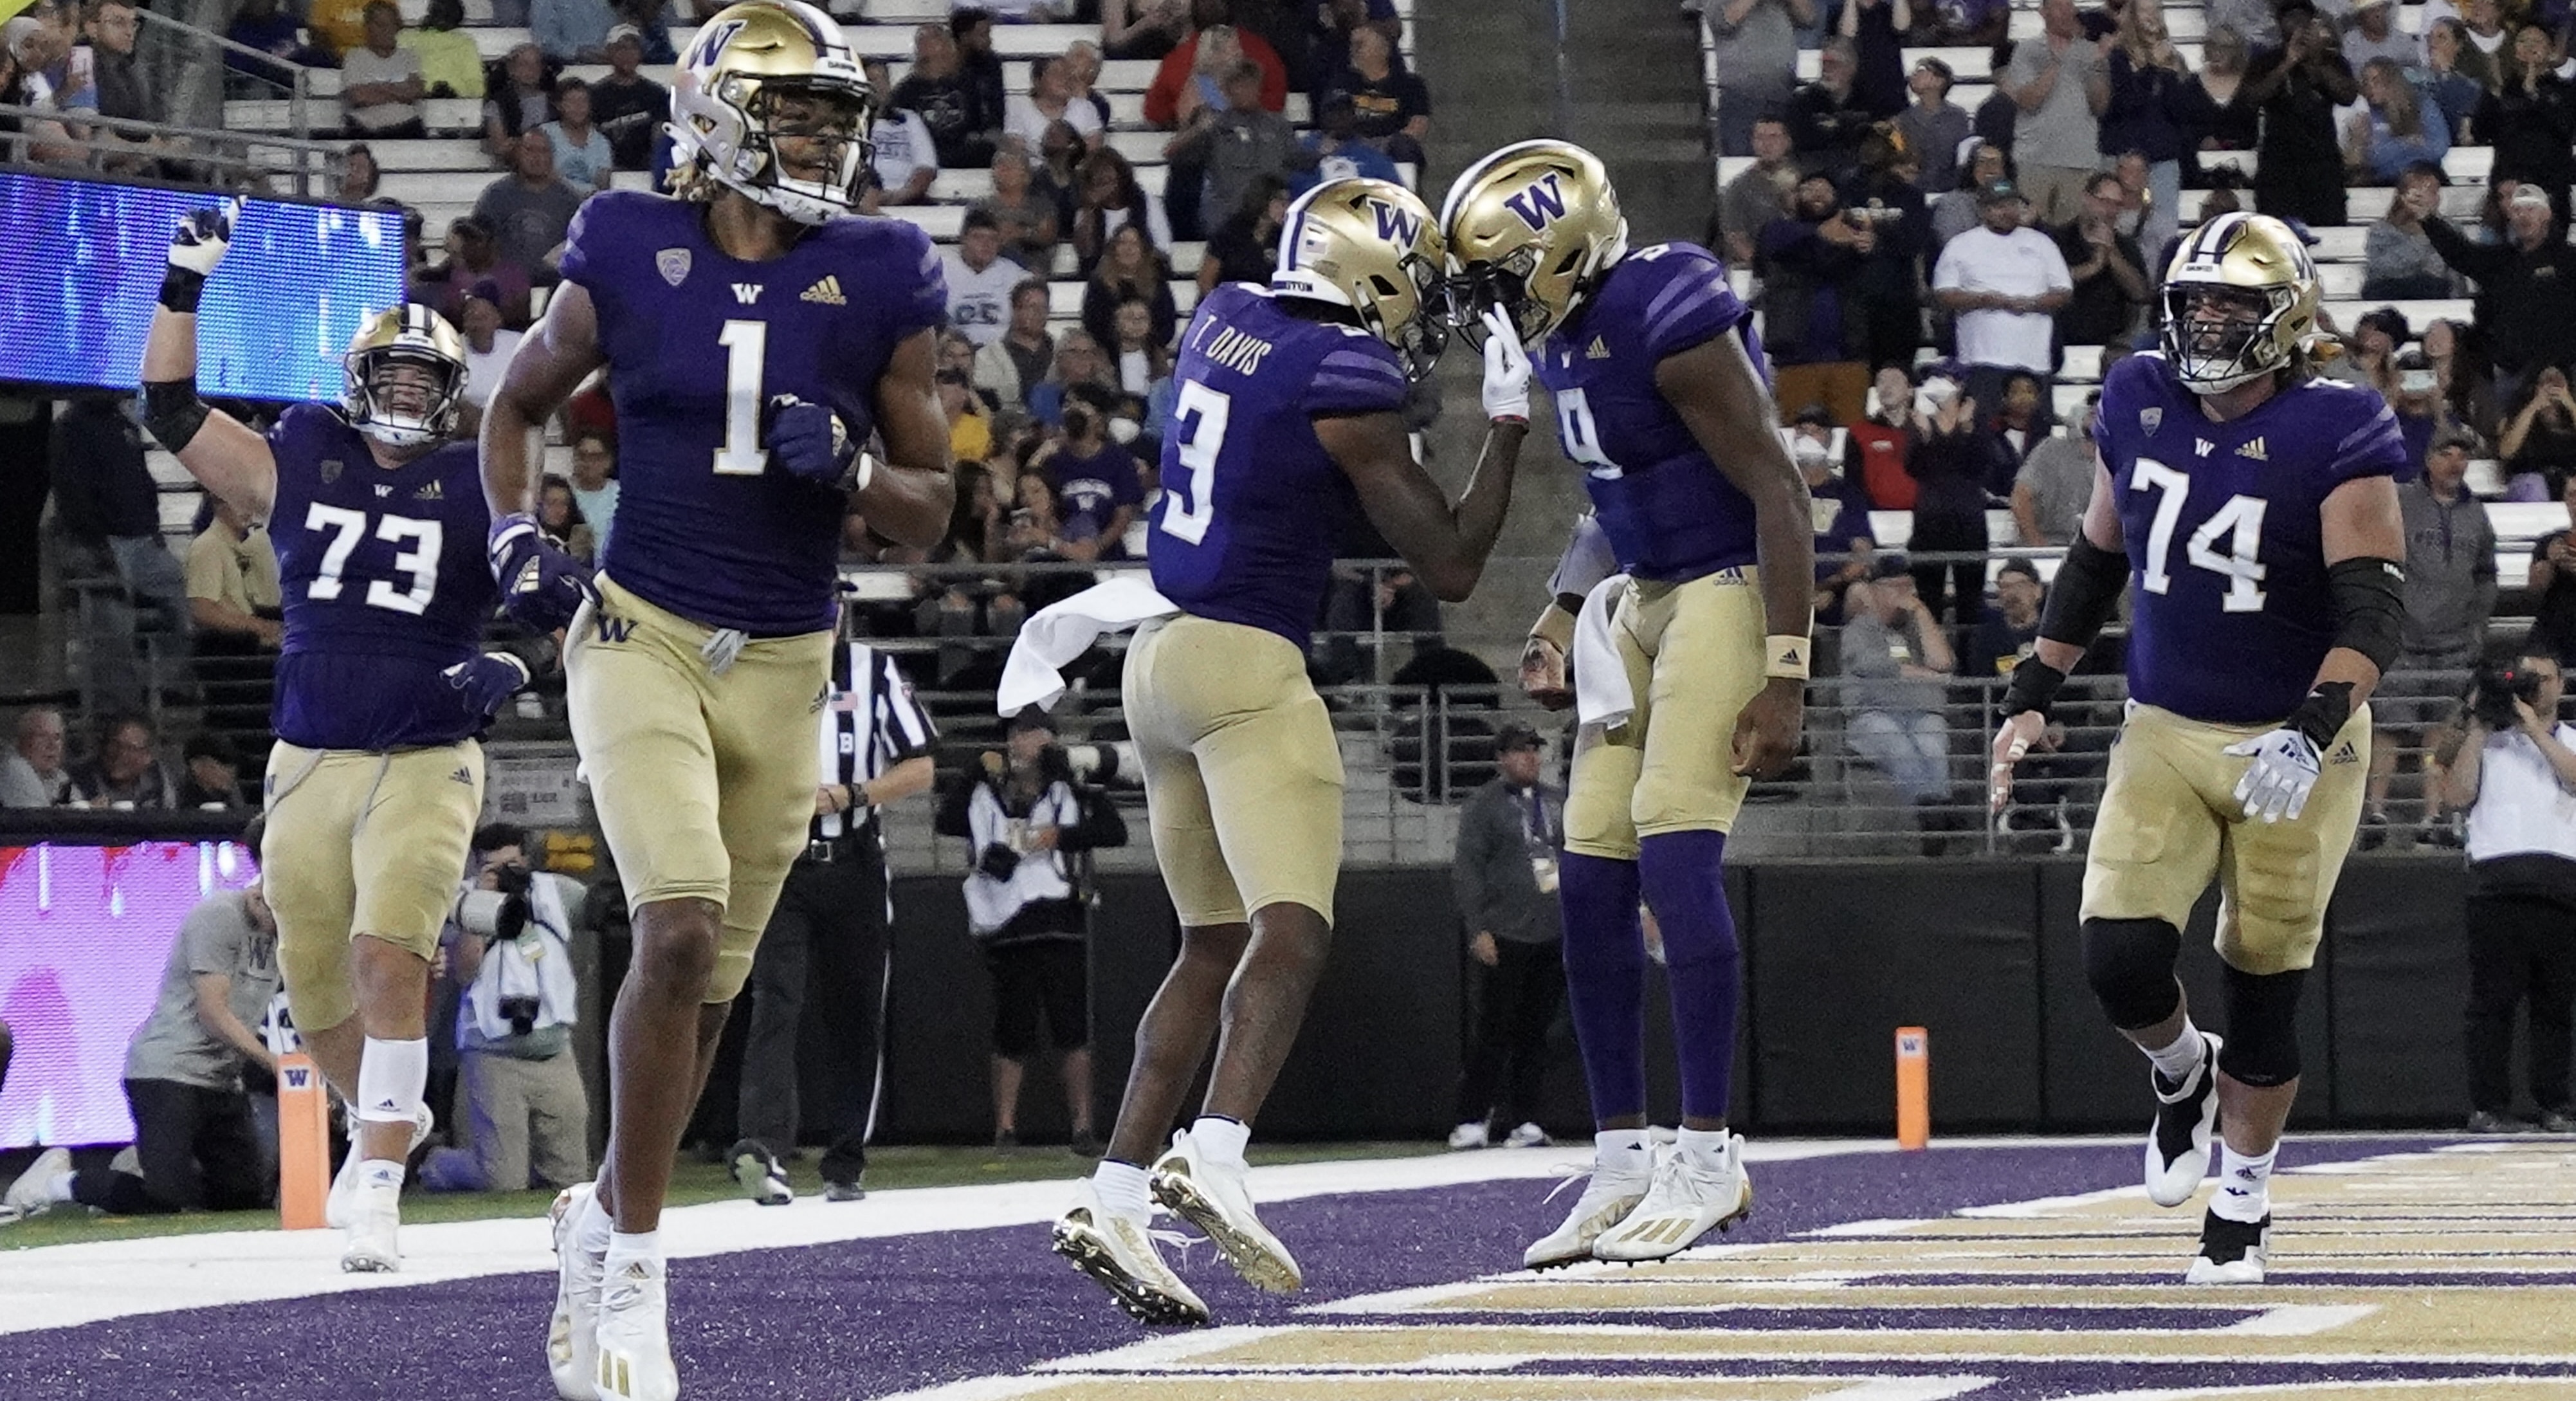 Long Overdue Look at a Husky Football Victory